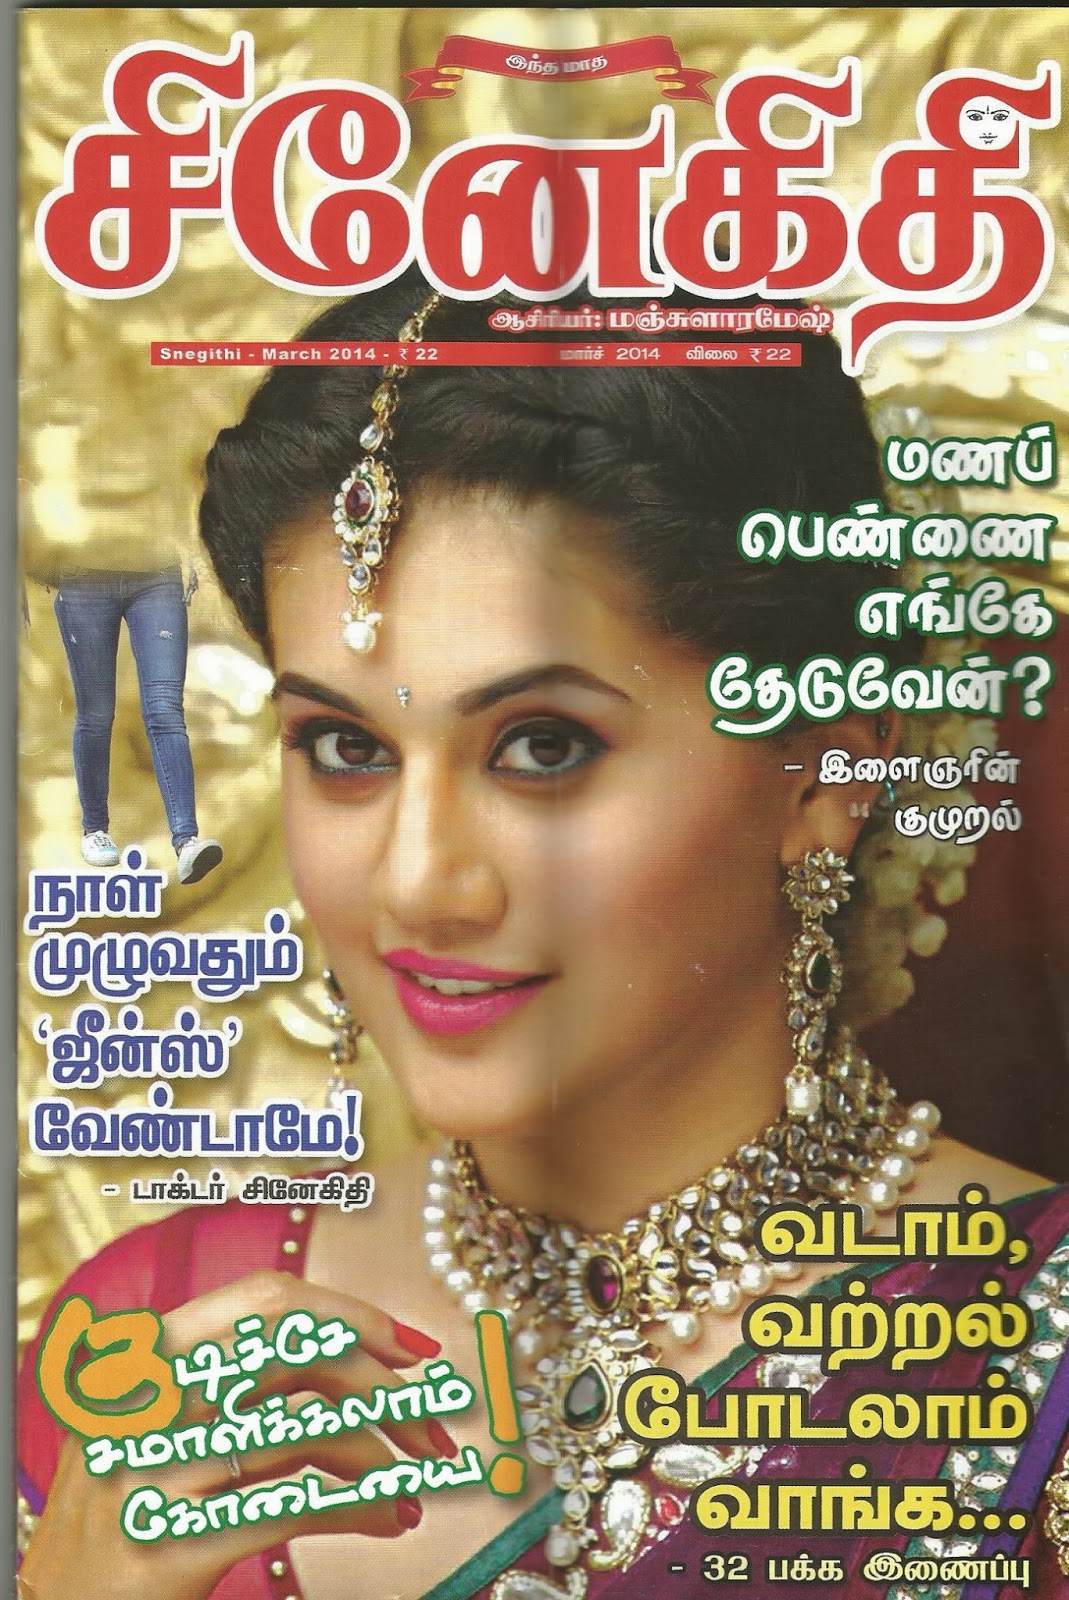 FRIENDS MY ARTICLE HAS BEEN PUBLISHED IN SINEGITHI TAMIL MONTHLY ...